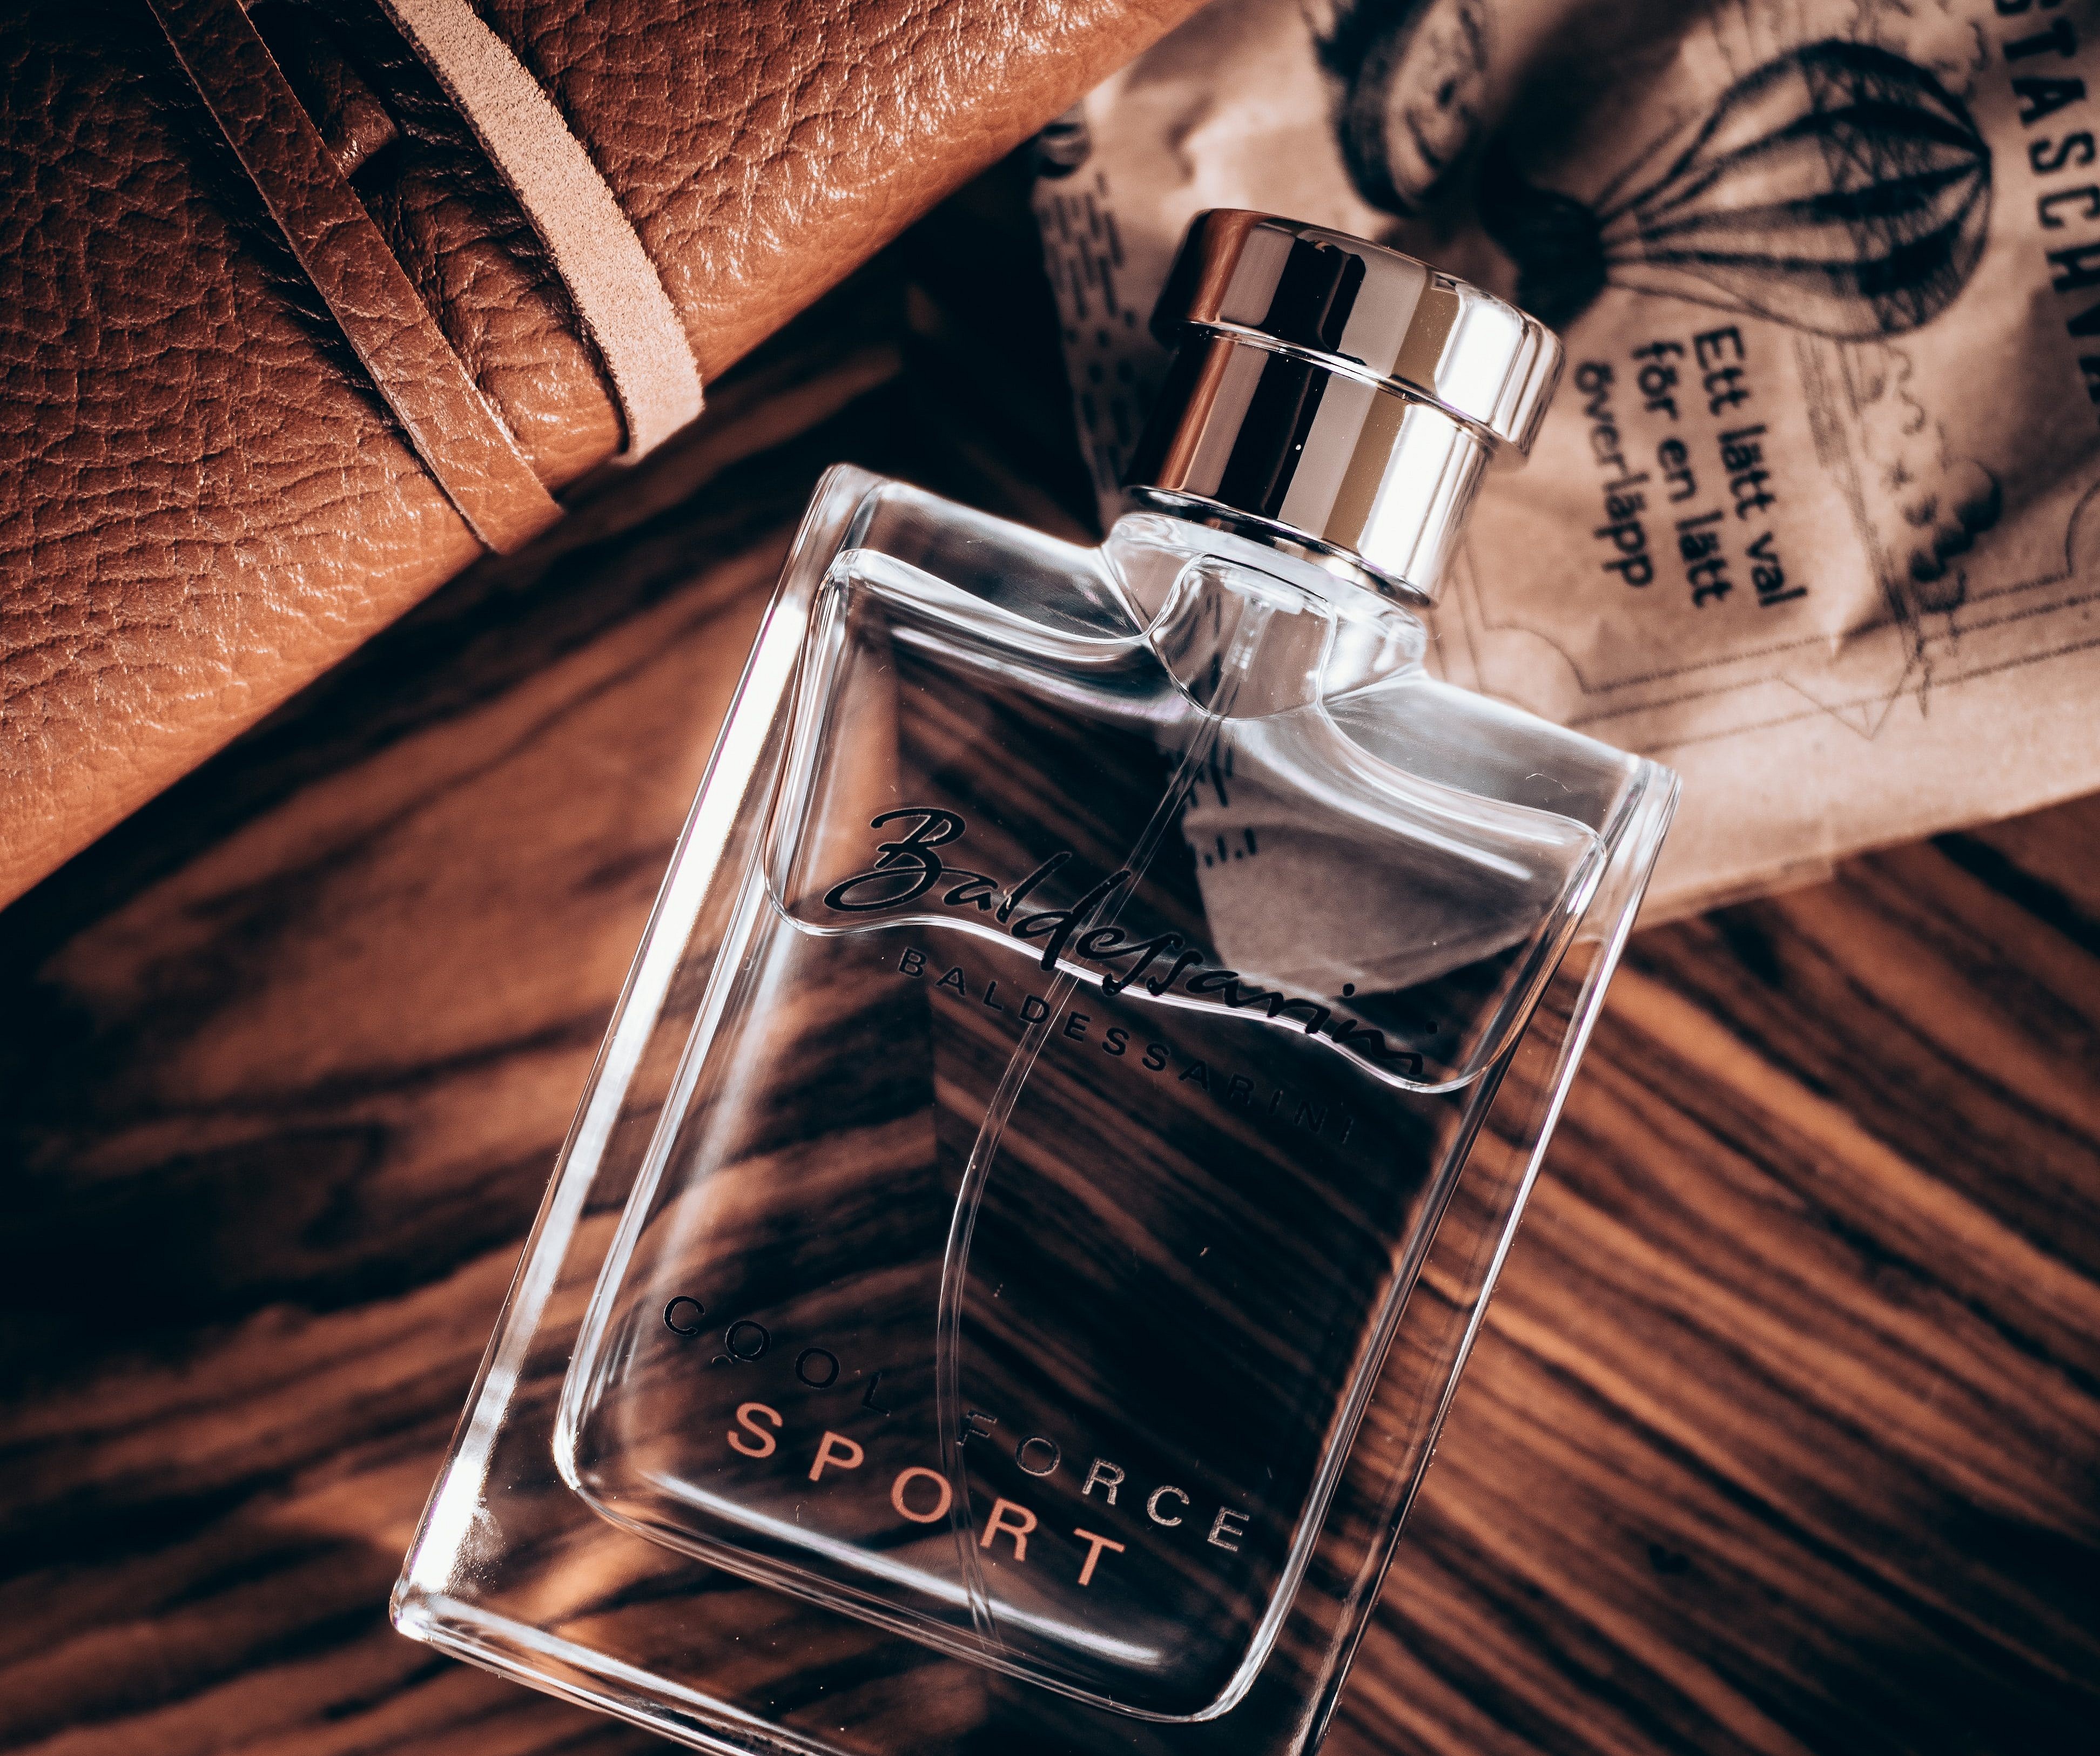 Heaven scent – Top 5 Leather Scents